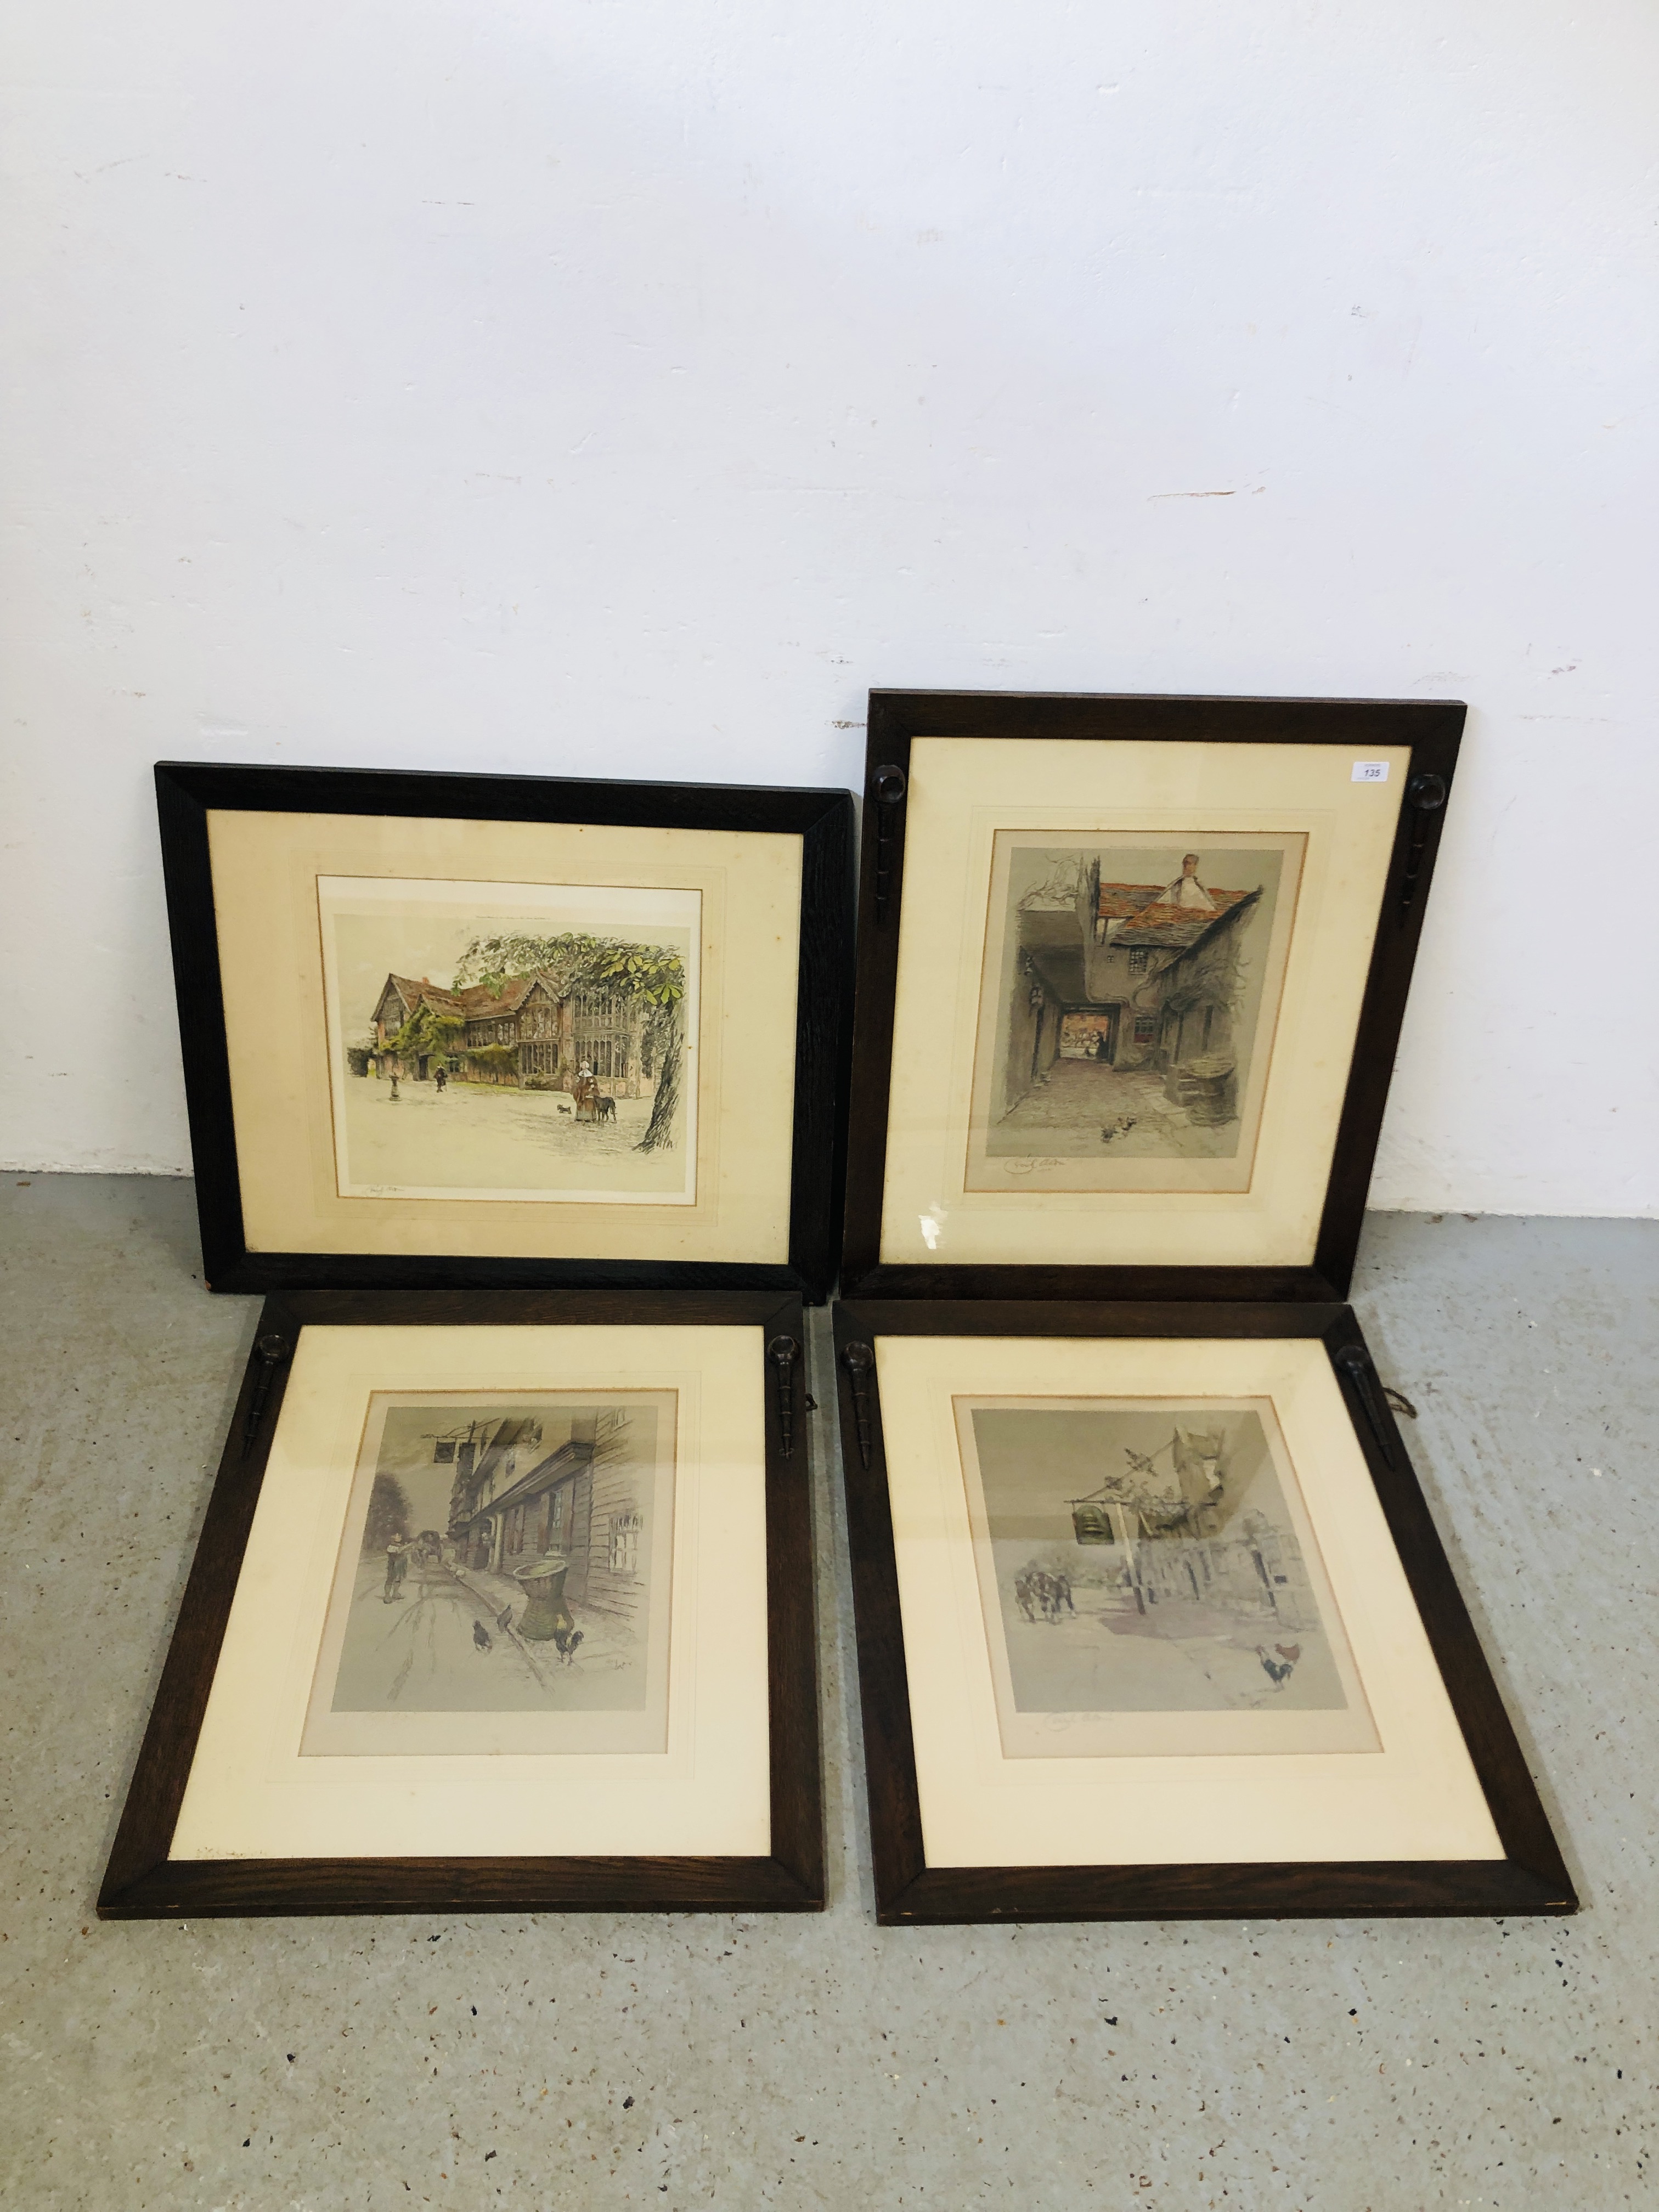 A GROUP OF THREE ARTS AND CRAFTS STYLE OAK FRAMED LITHOGRAPHS BEARING PENCIL SIGNATURE "CECIL